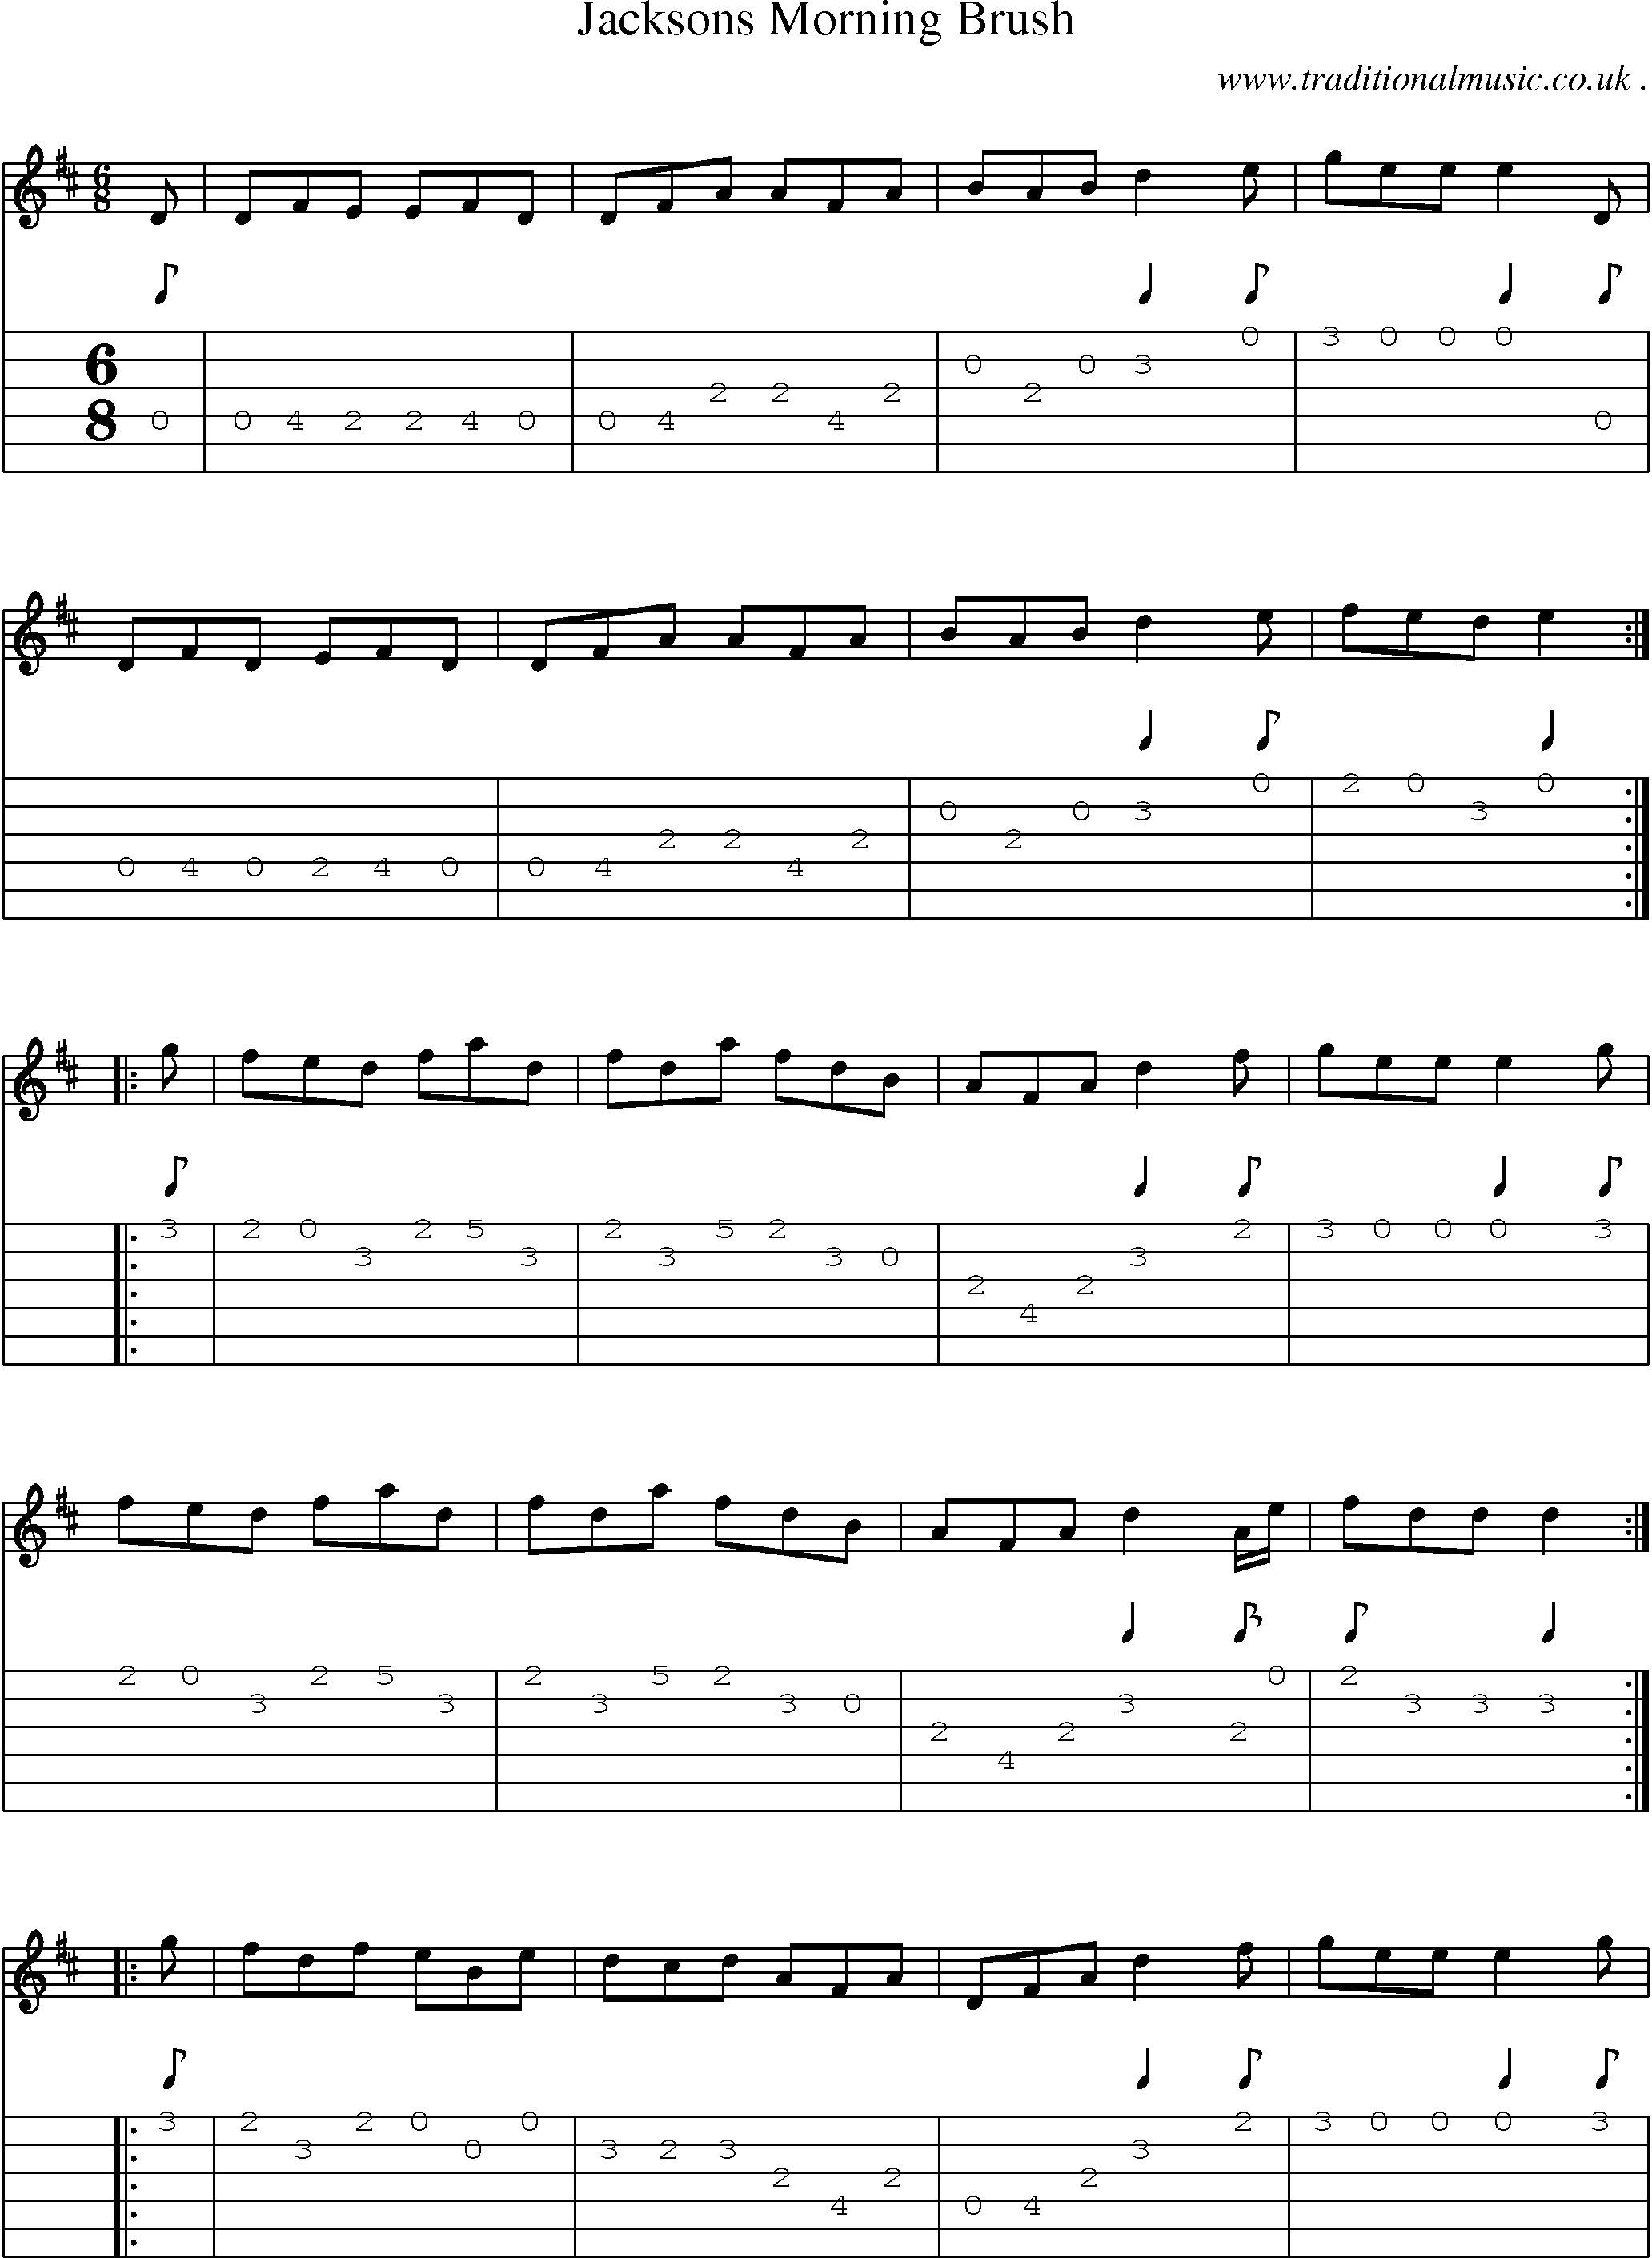 Sheet-Music and Guitar Tabs for Jacksons Morning Brush